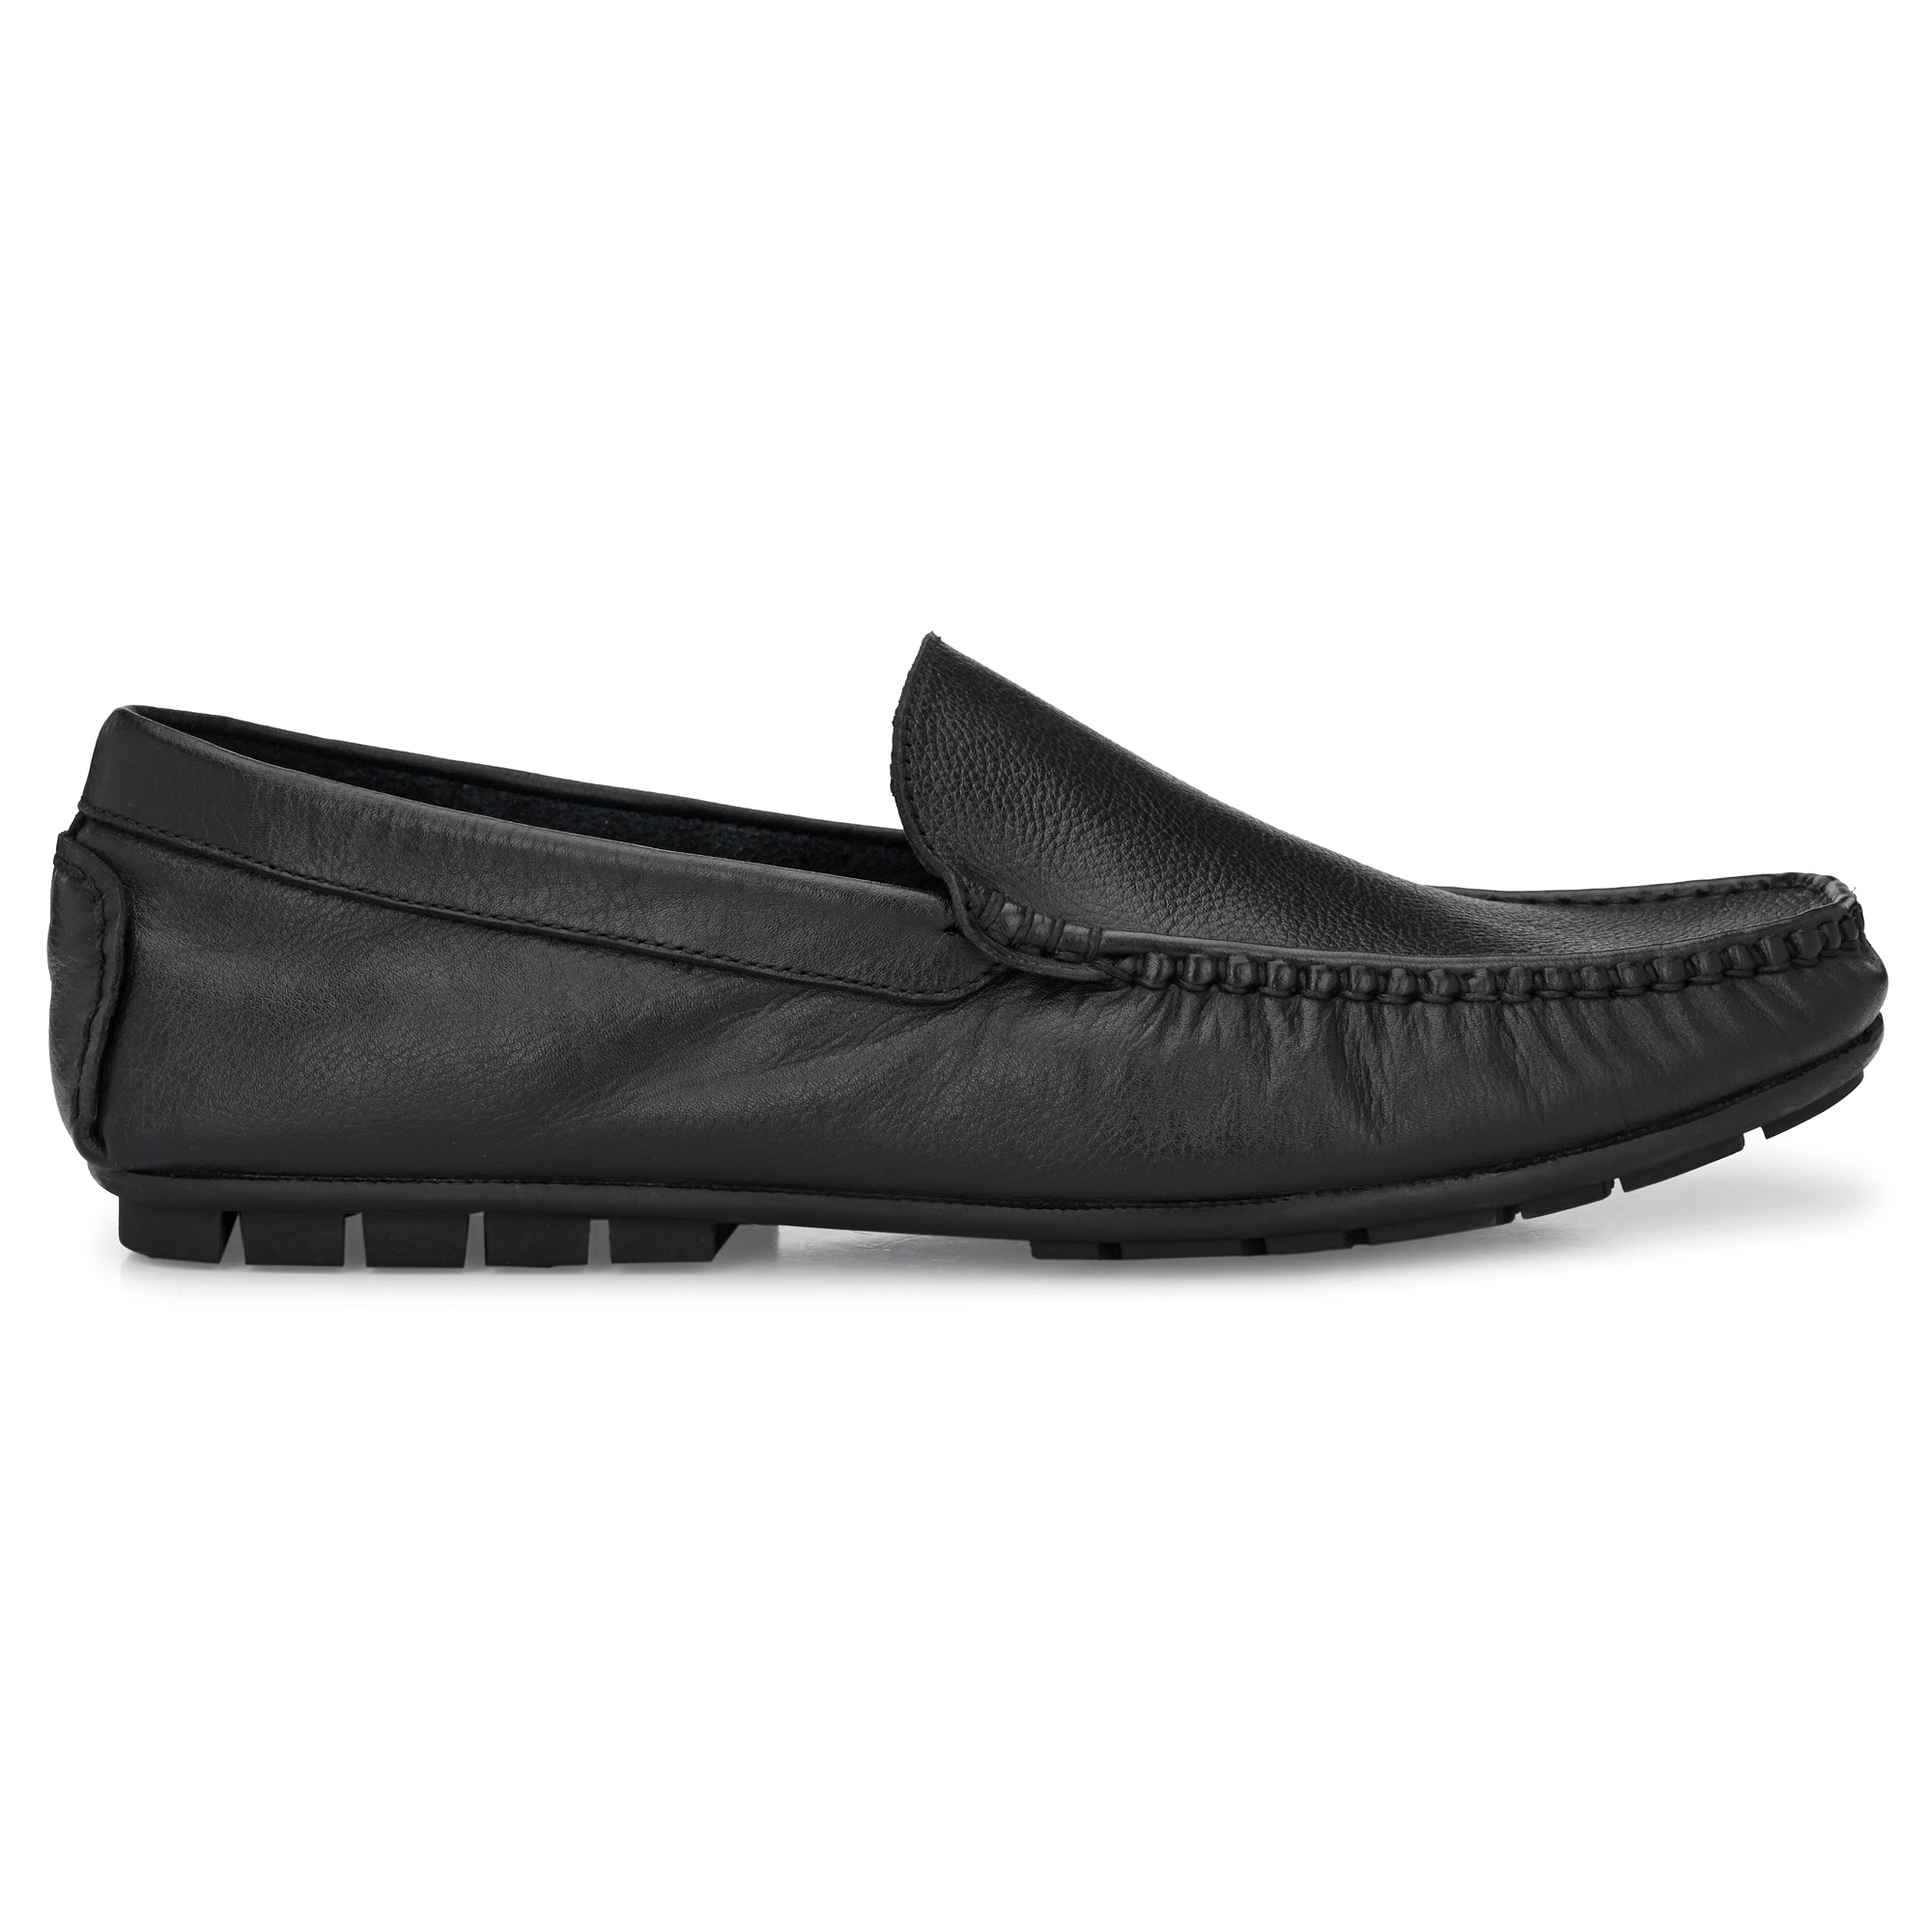 Egoss Casual Slip on Loafers Shoes For Men